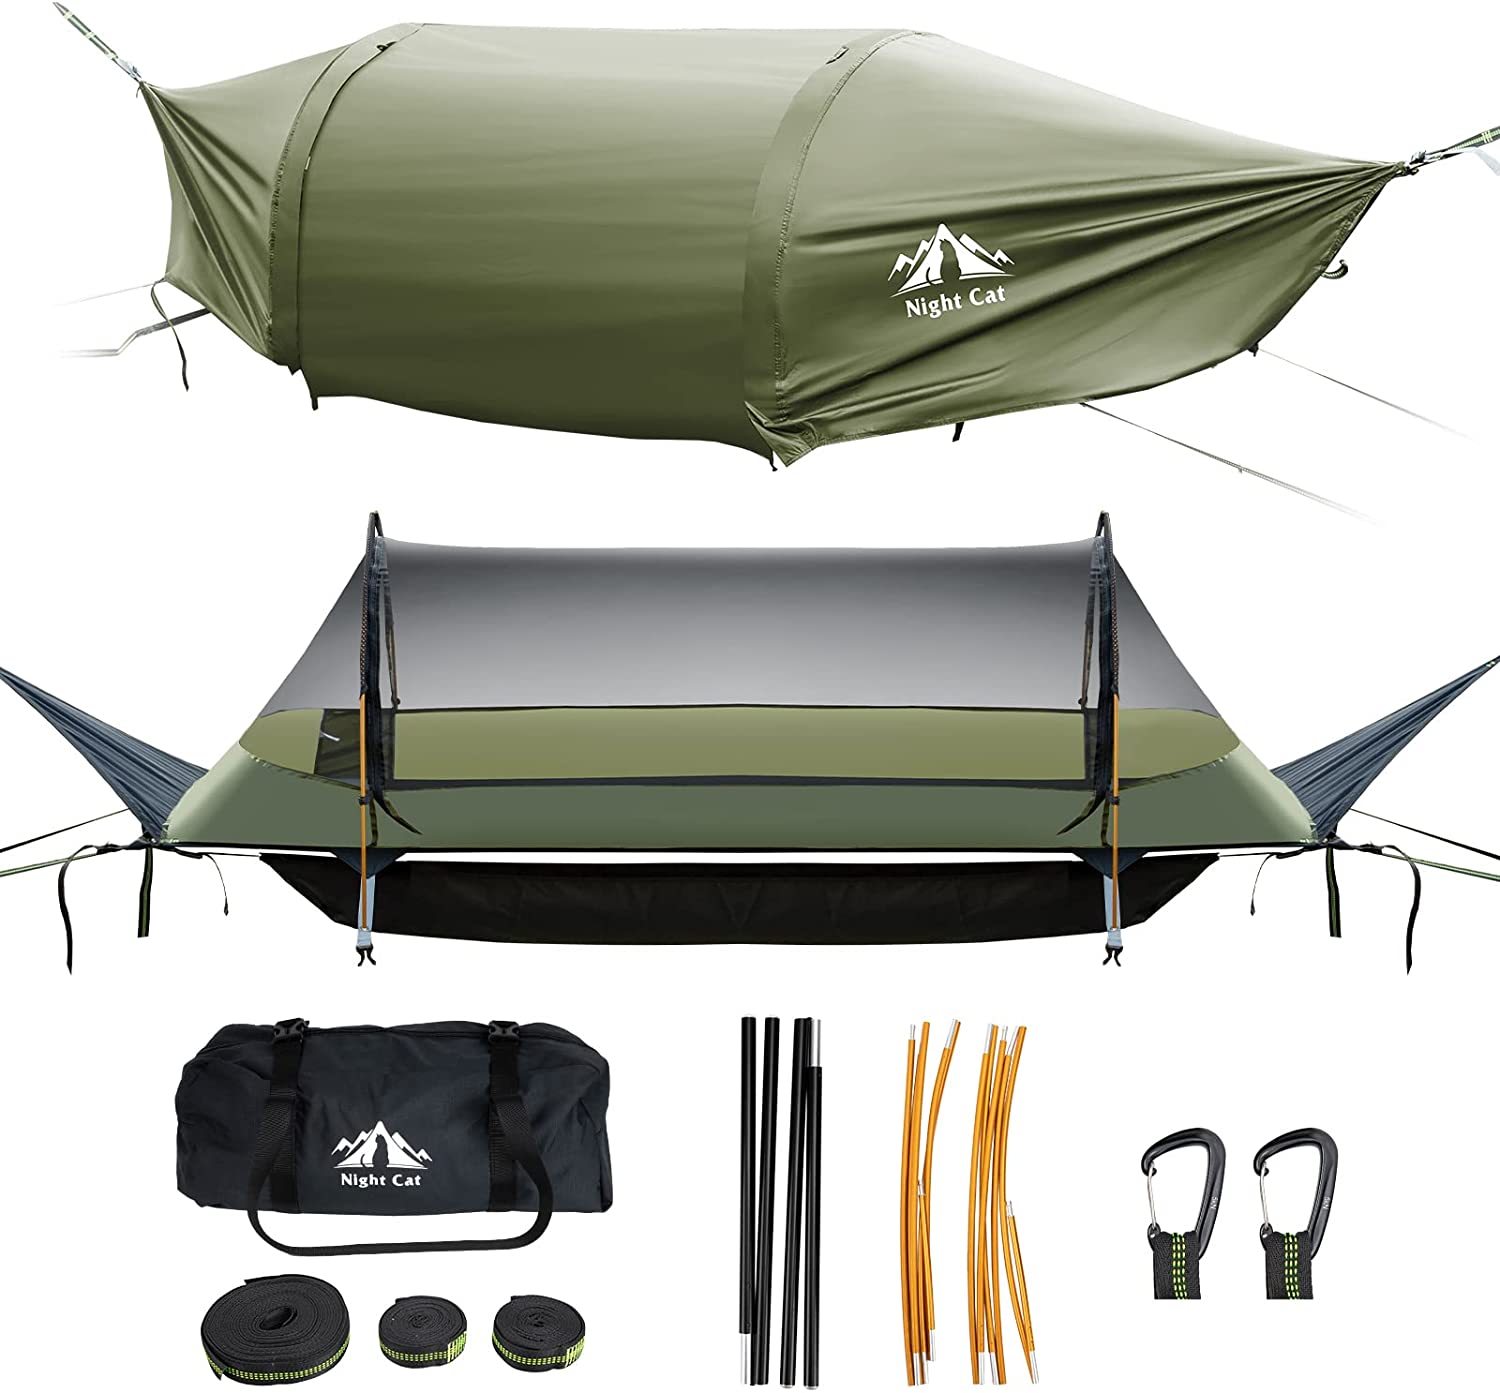 Best Lightweight Waterproof Backpacking Tent for Sale - Night Cat Tent